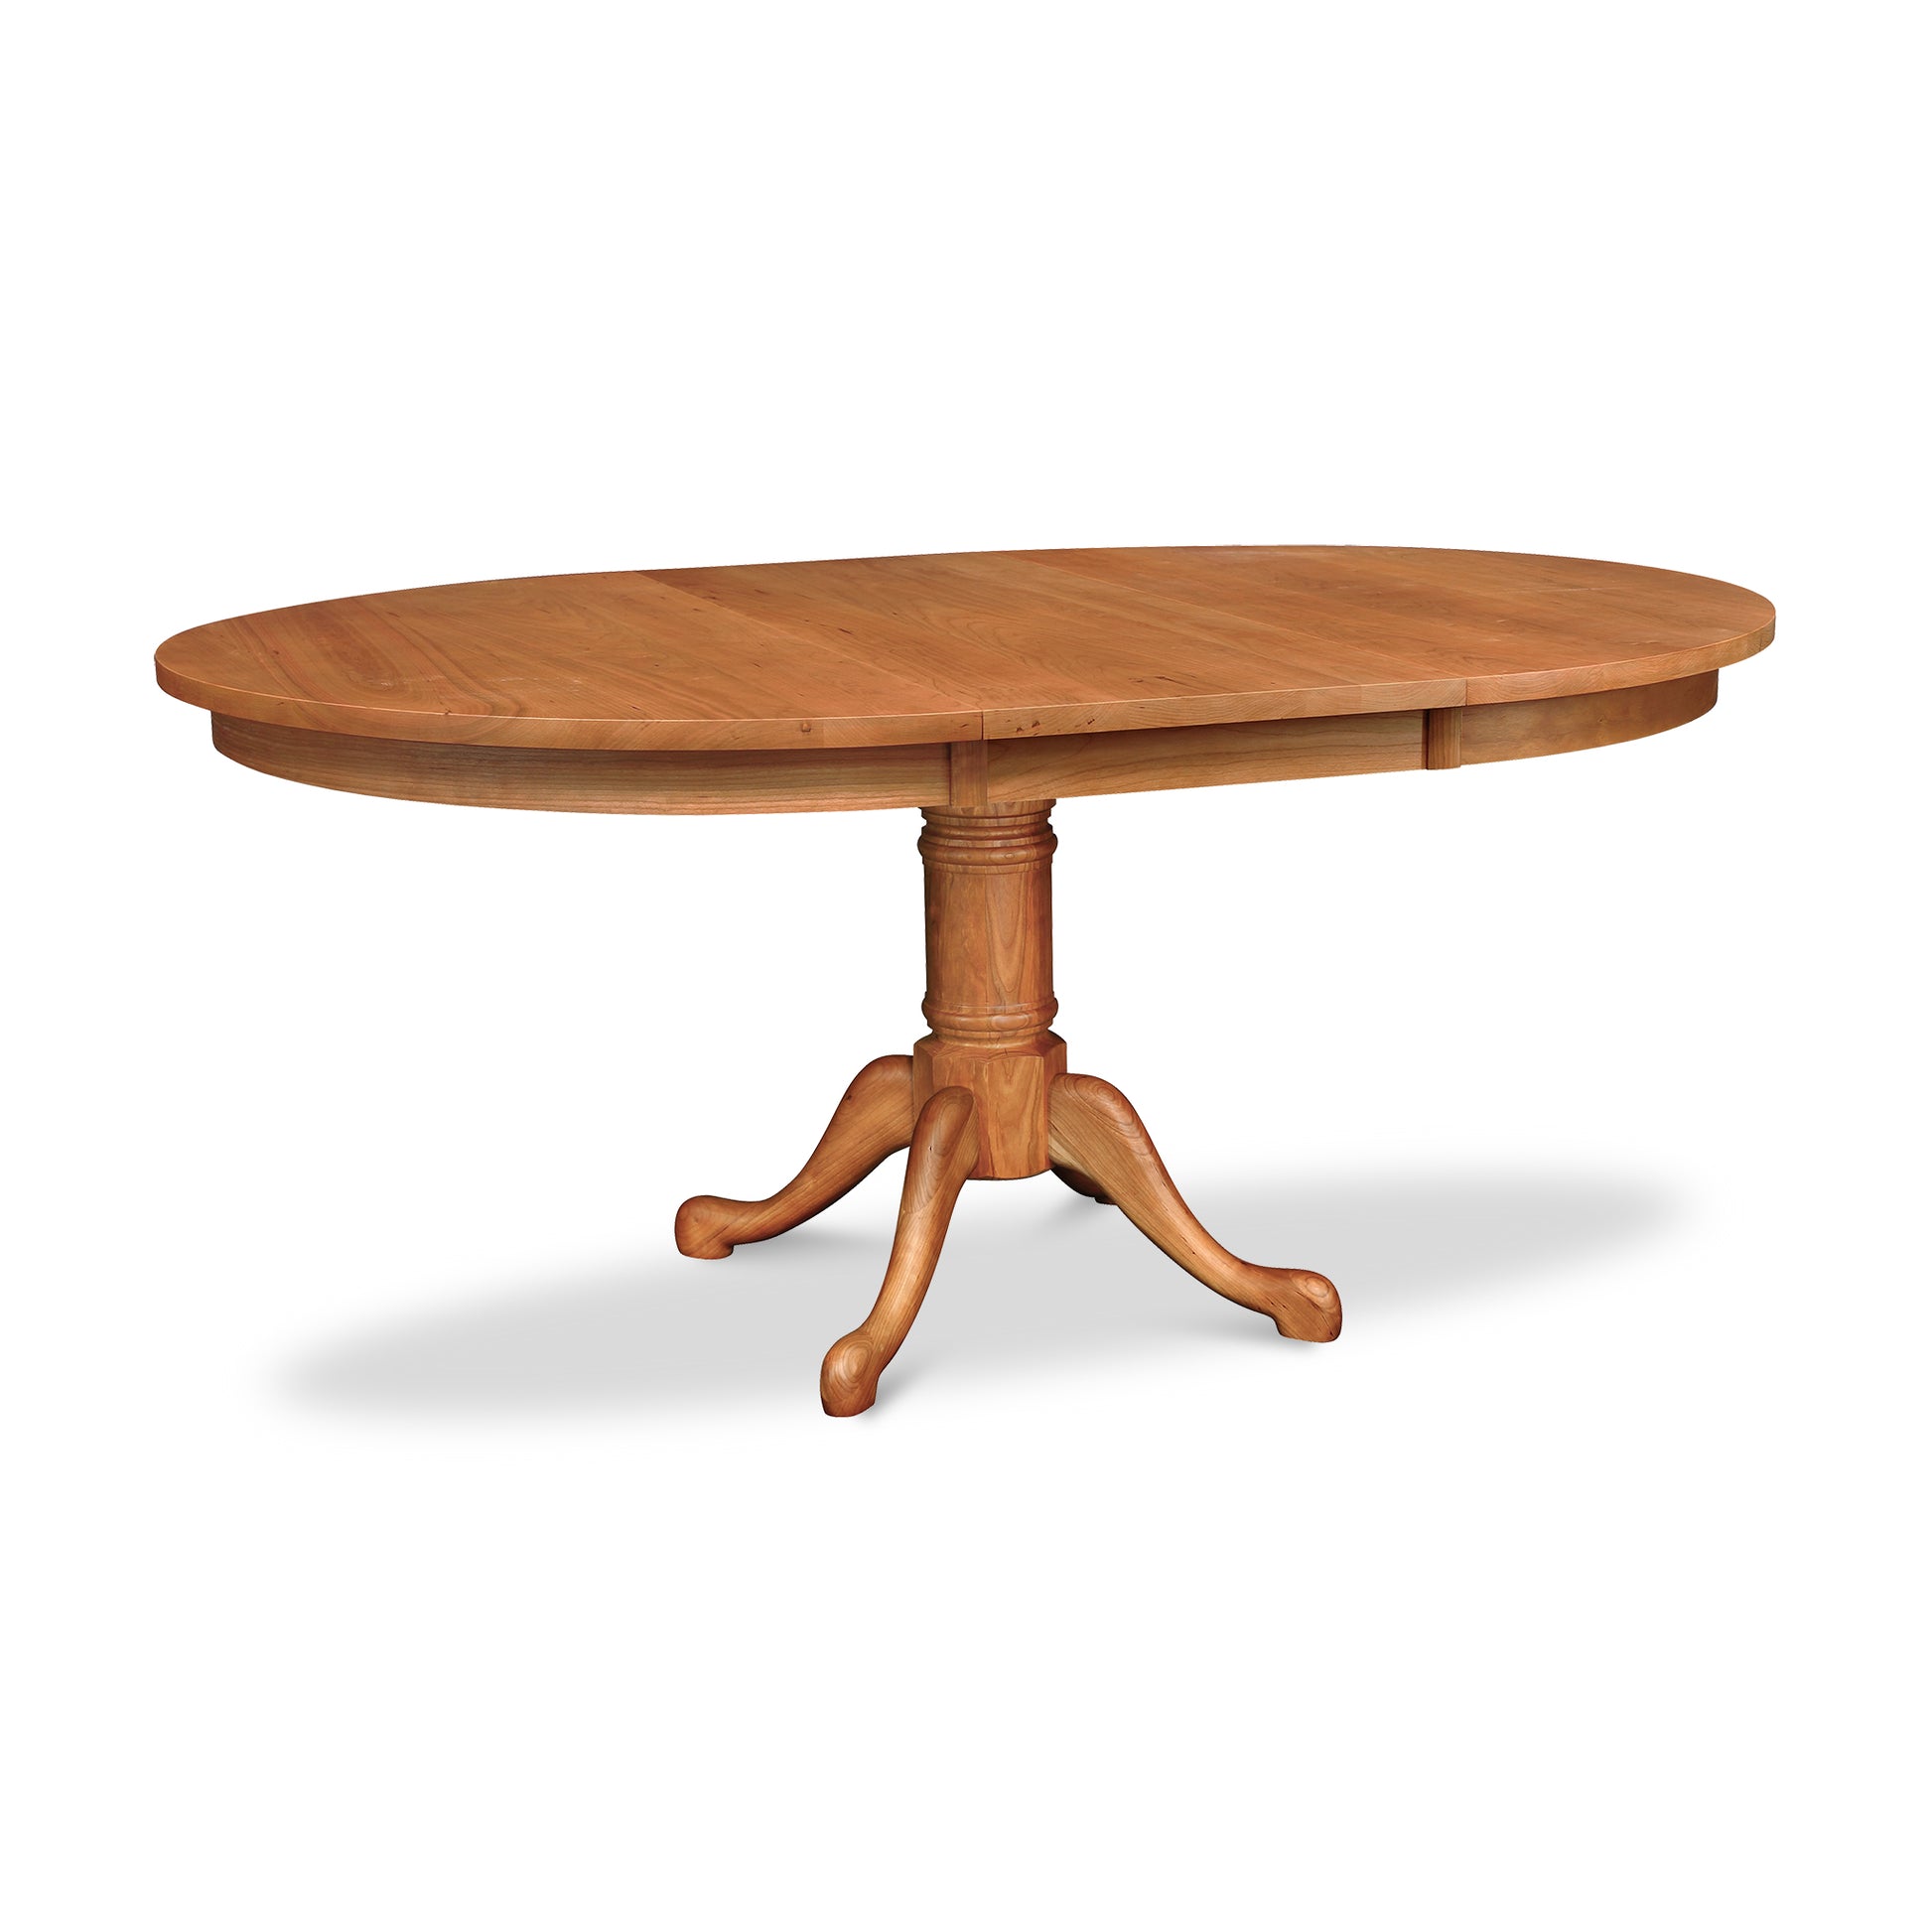 A Cabriole Single Pedestal Round Extension Table with a traditional claw foot base by Lyndon Furniture.